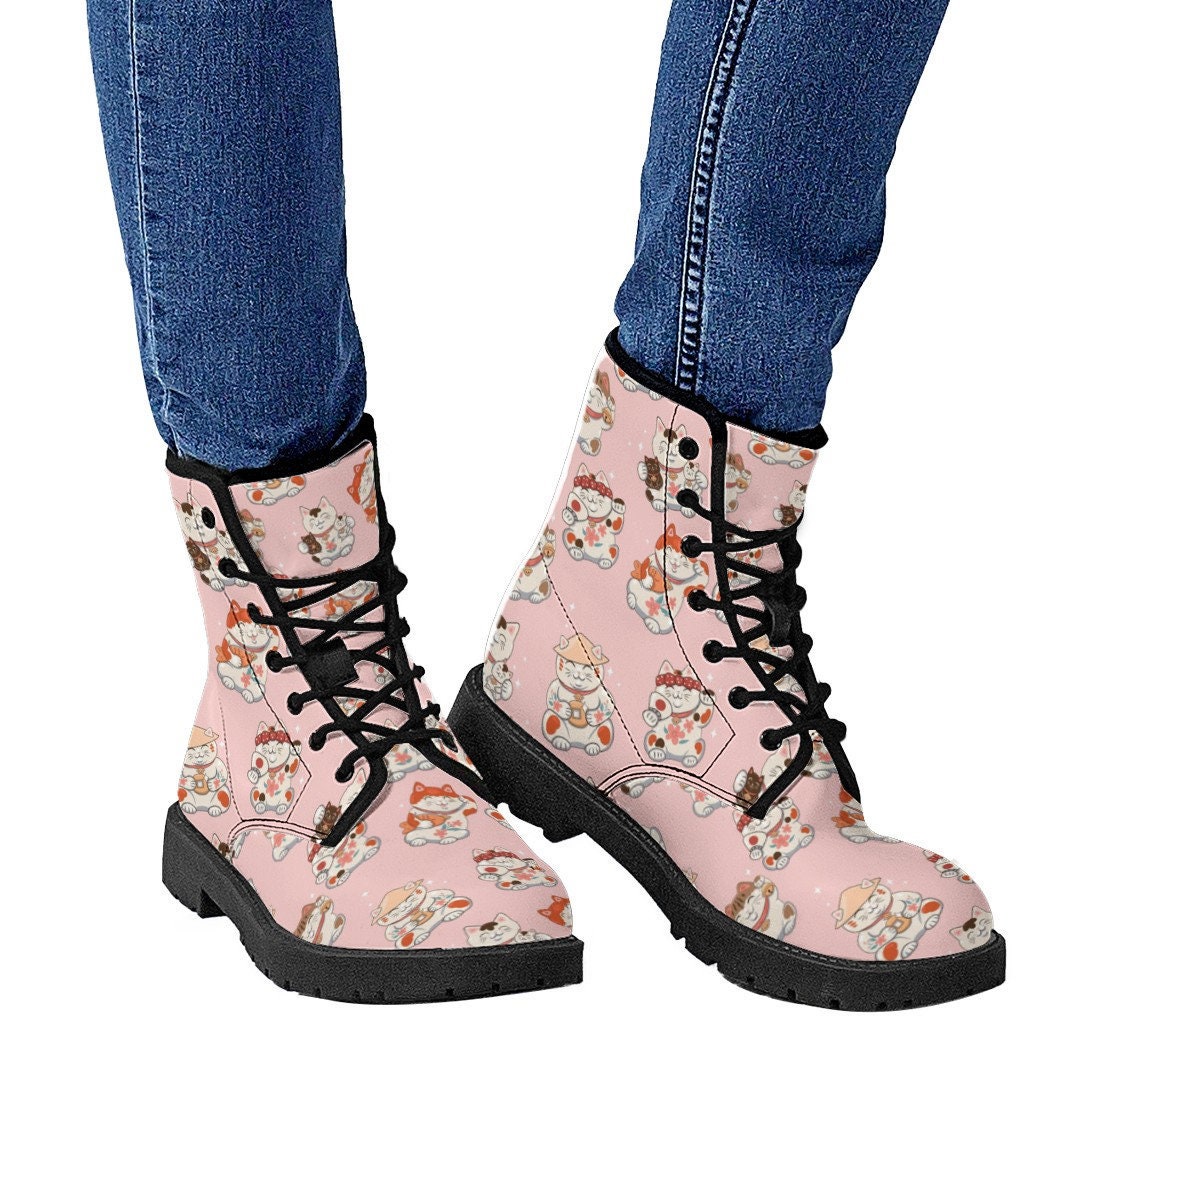 Maneki Neko Boots, Pink And Blue Cats Leather Boots, Handcrafted Boots, Streetwear, Women Girl Gift, Classic Boot, Footwear